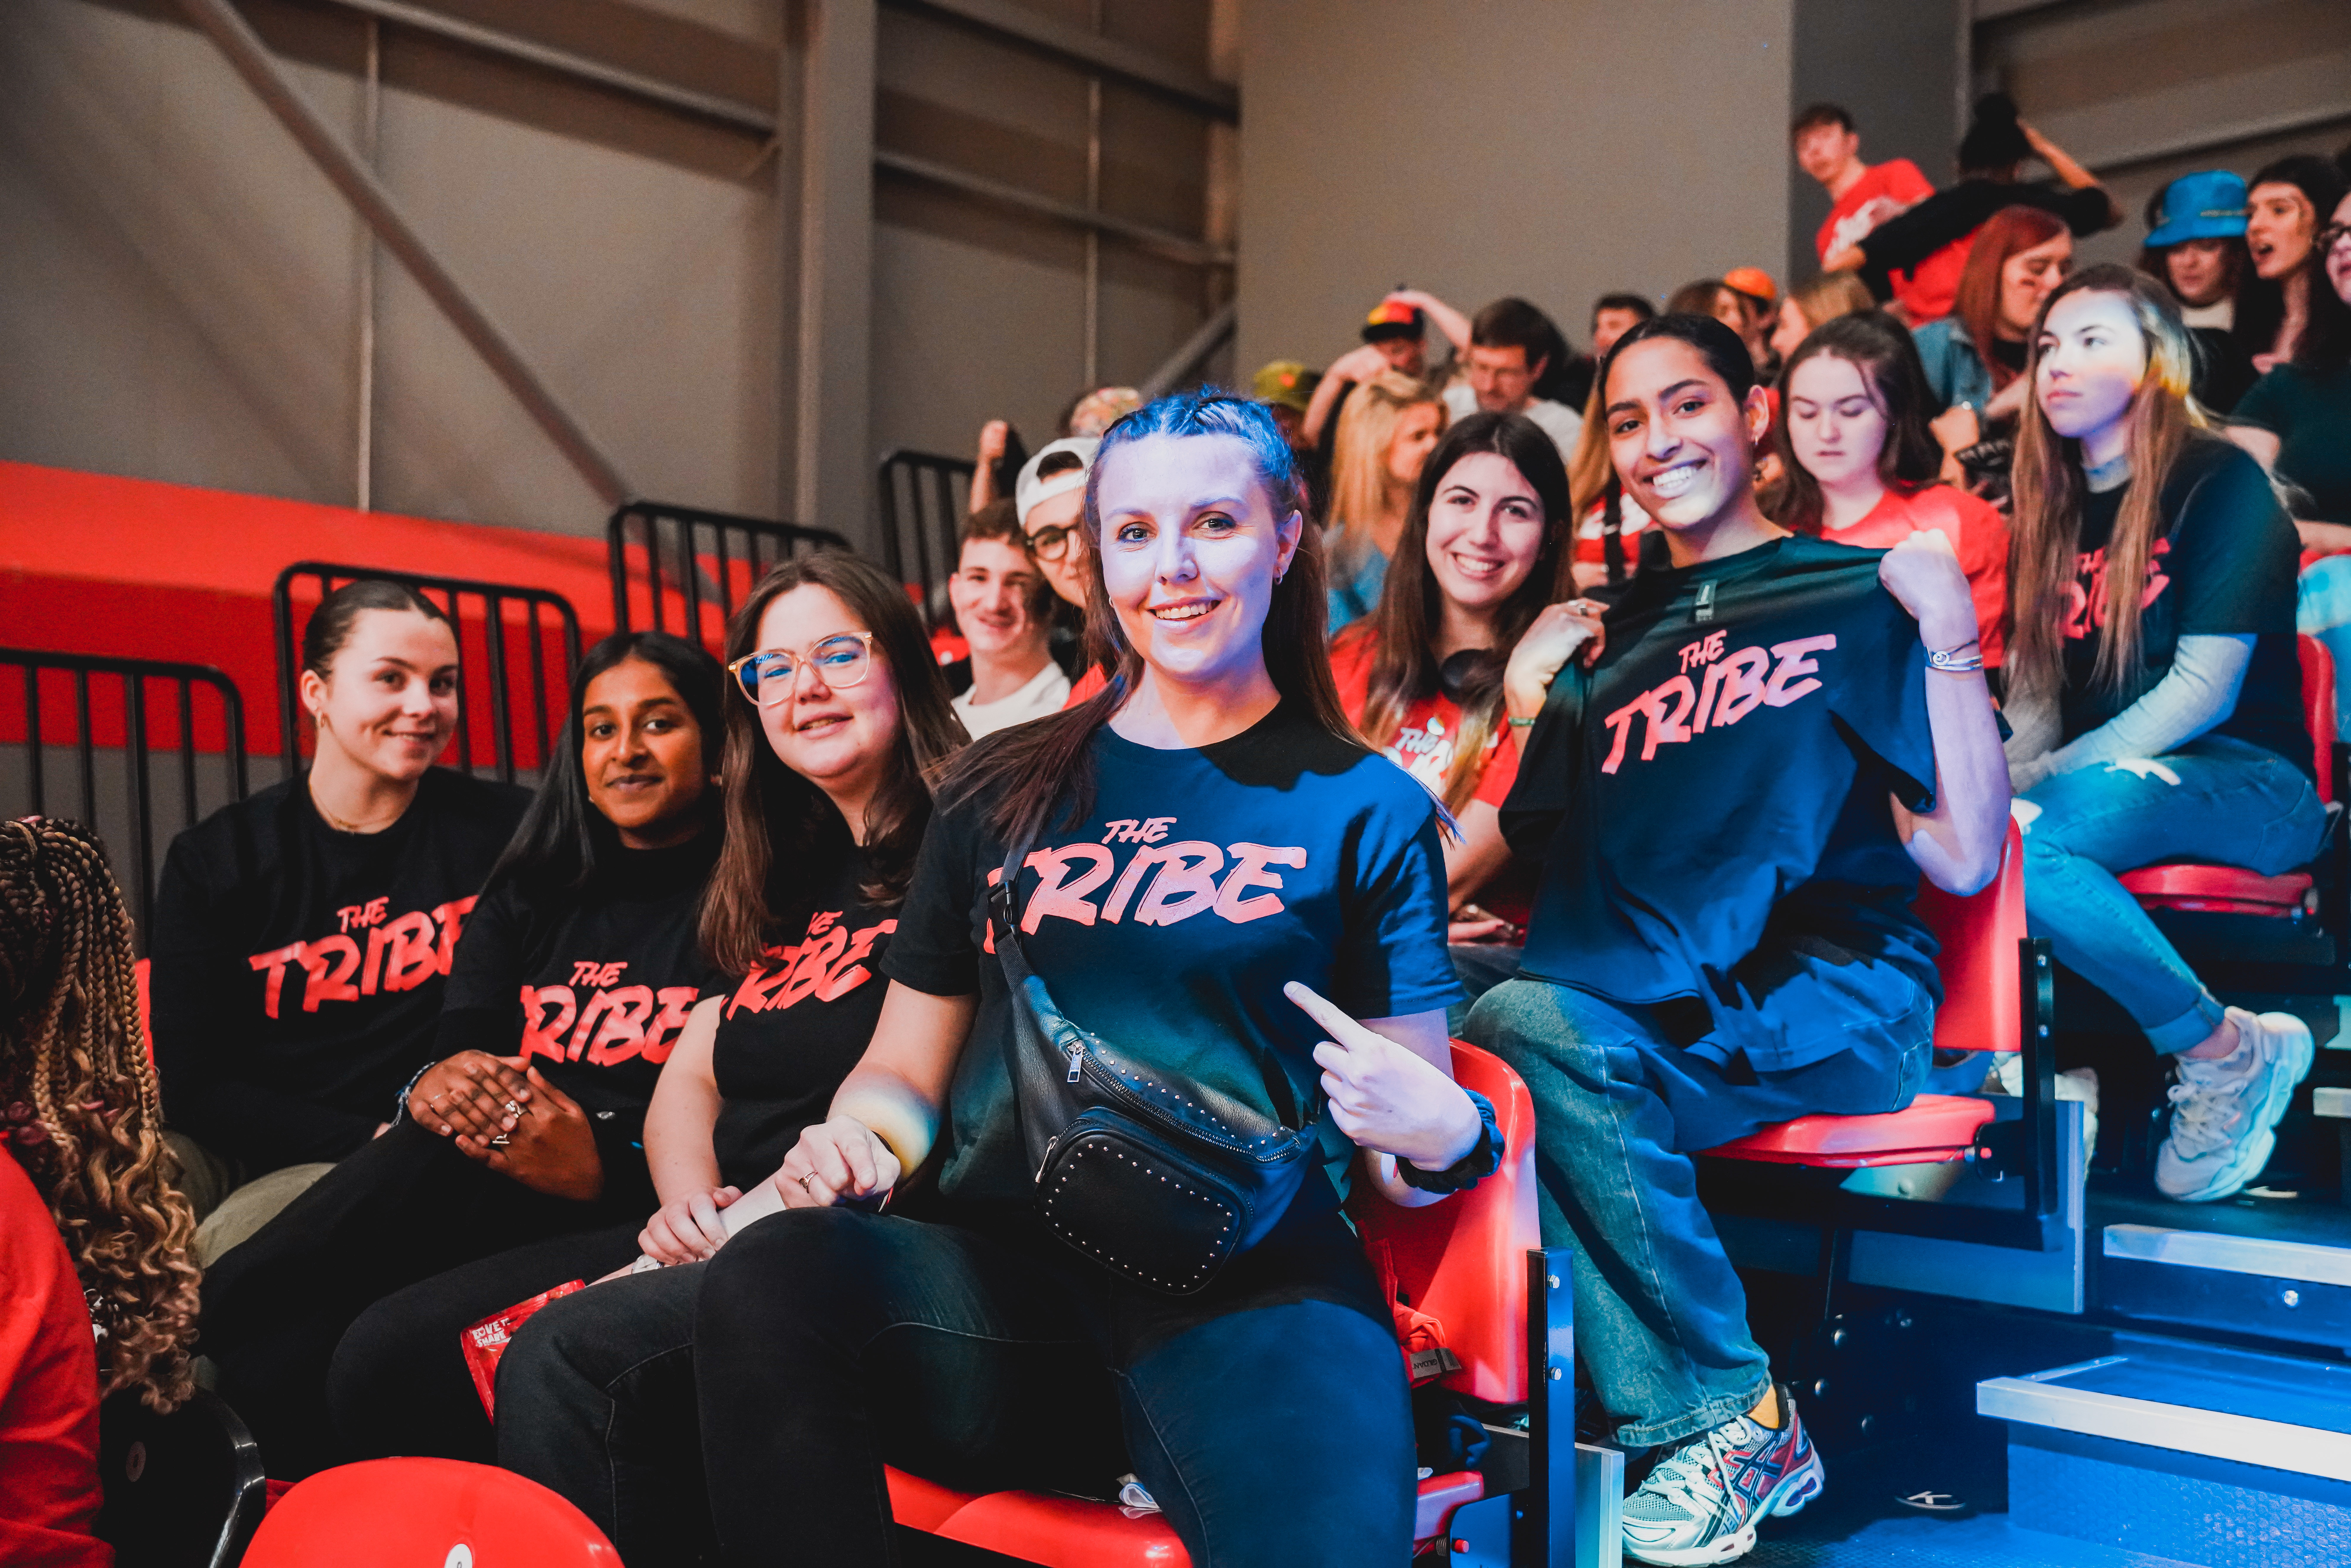 Essex Rebels Fan Zone/Tribe Takeover